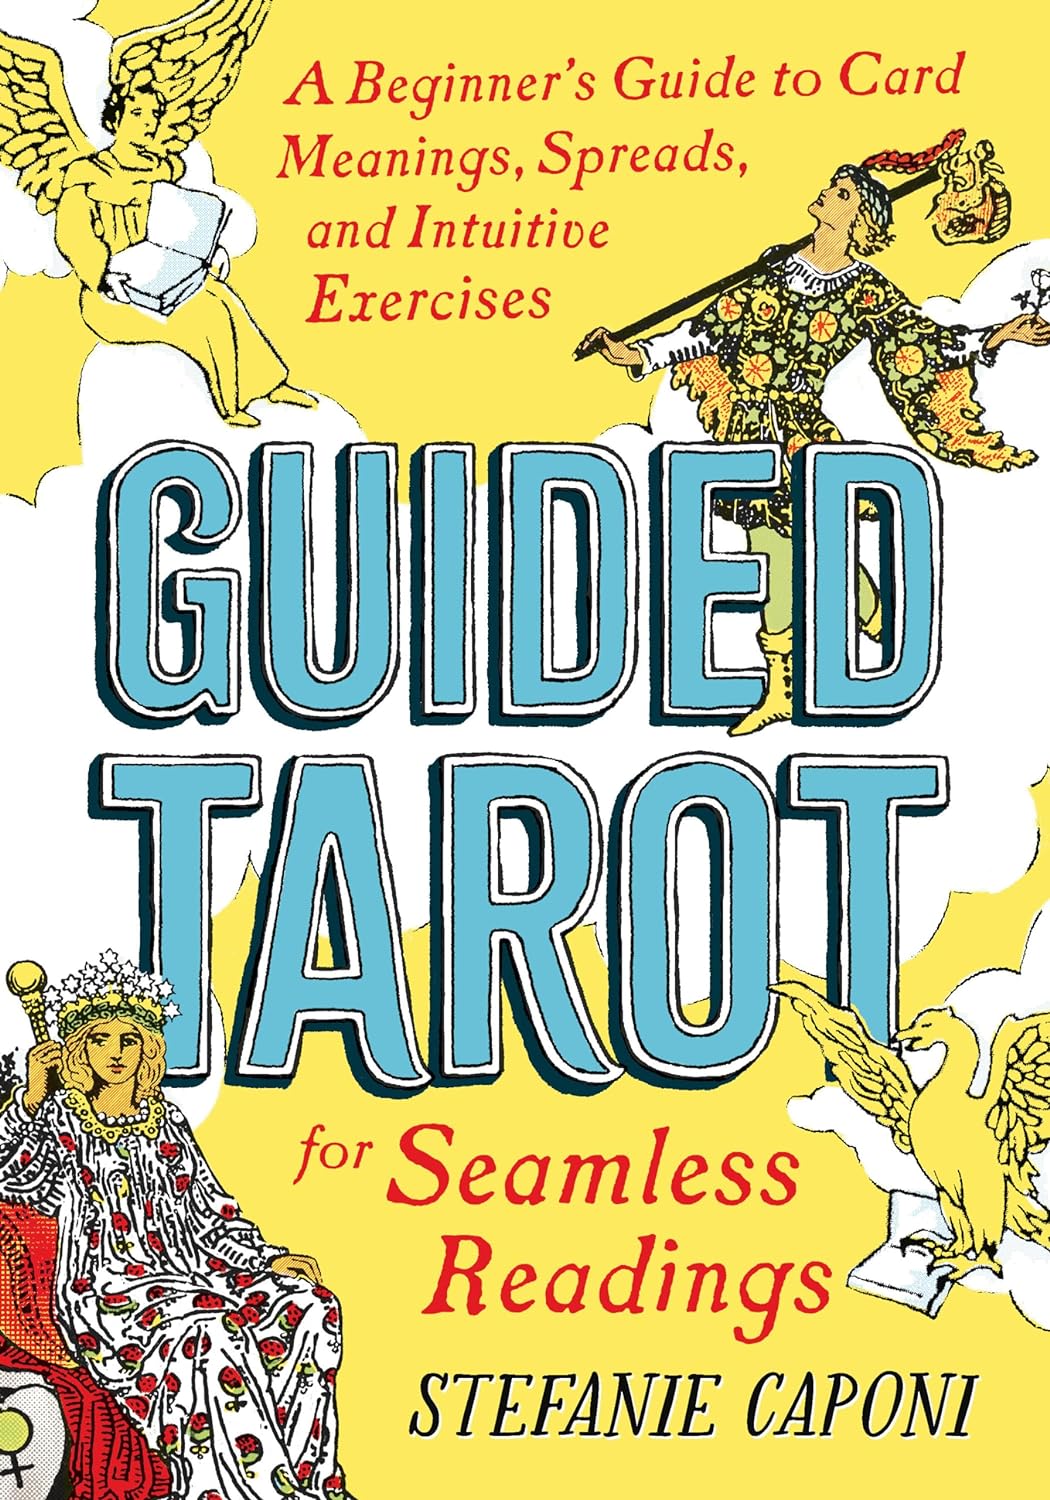 Guided Tarot For Seamless Readings